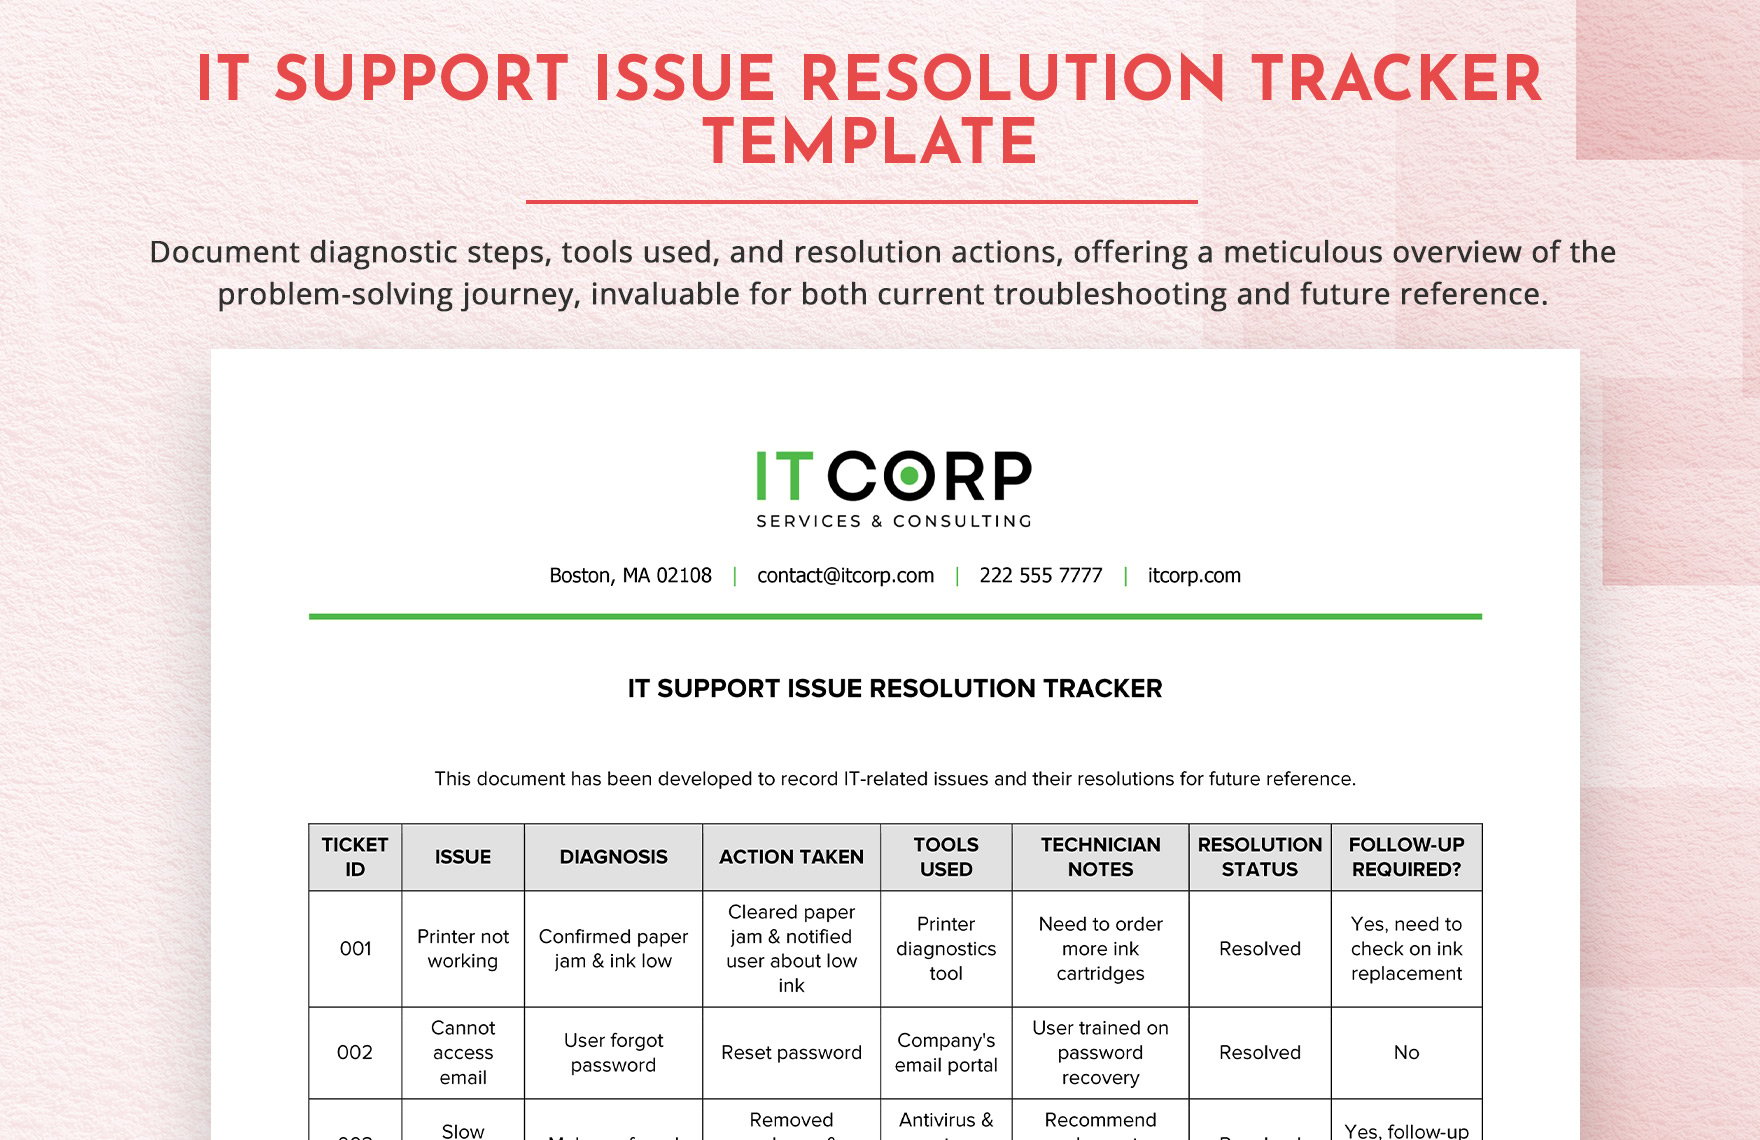 IT Support Issue Resolution Tracker Template